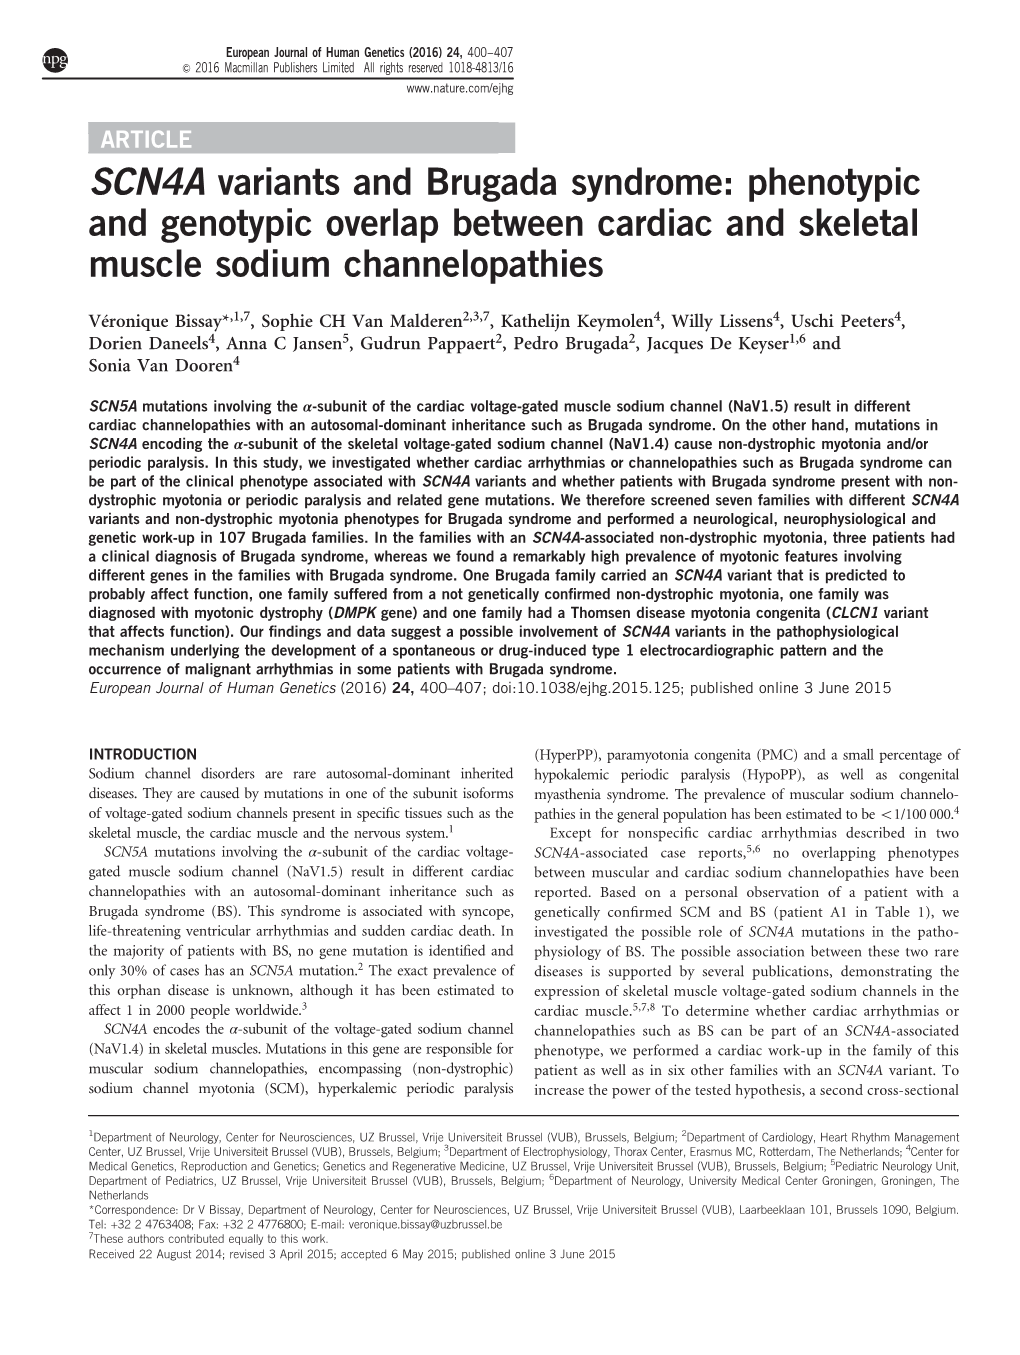 SCN4A Variants and Brugada Syndrome: Phenotypic and Genotypic Overlap Between Cardiac and Skeletal Muscle Sodium Channelopathies